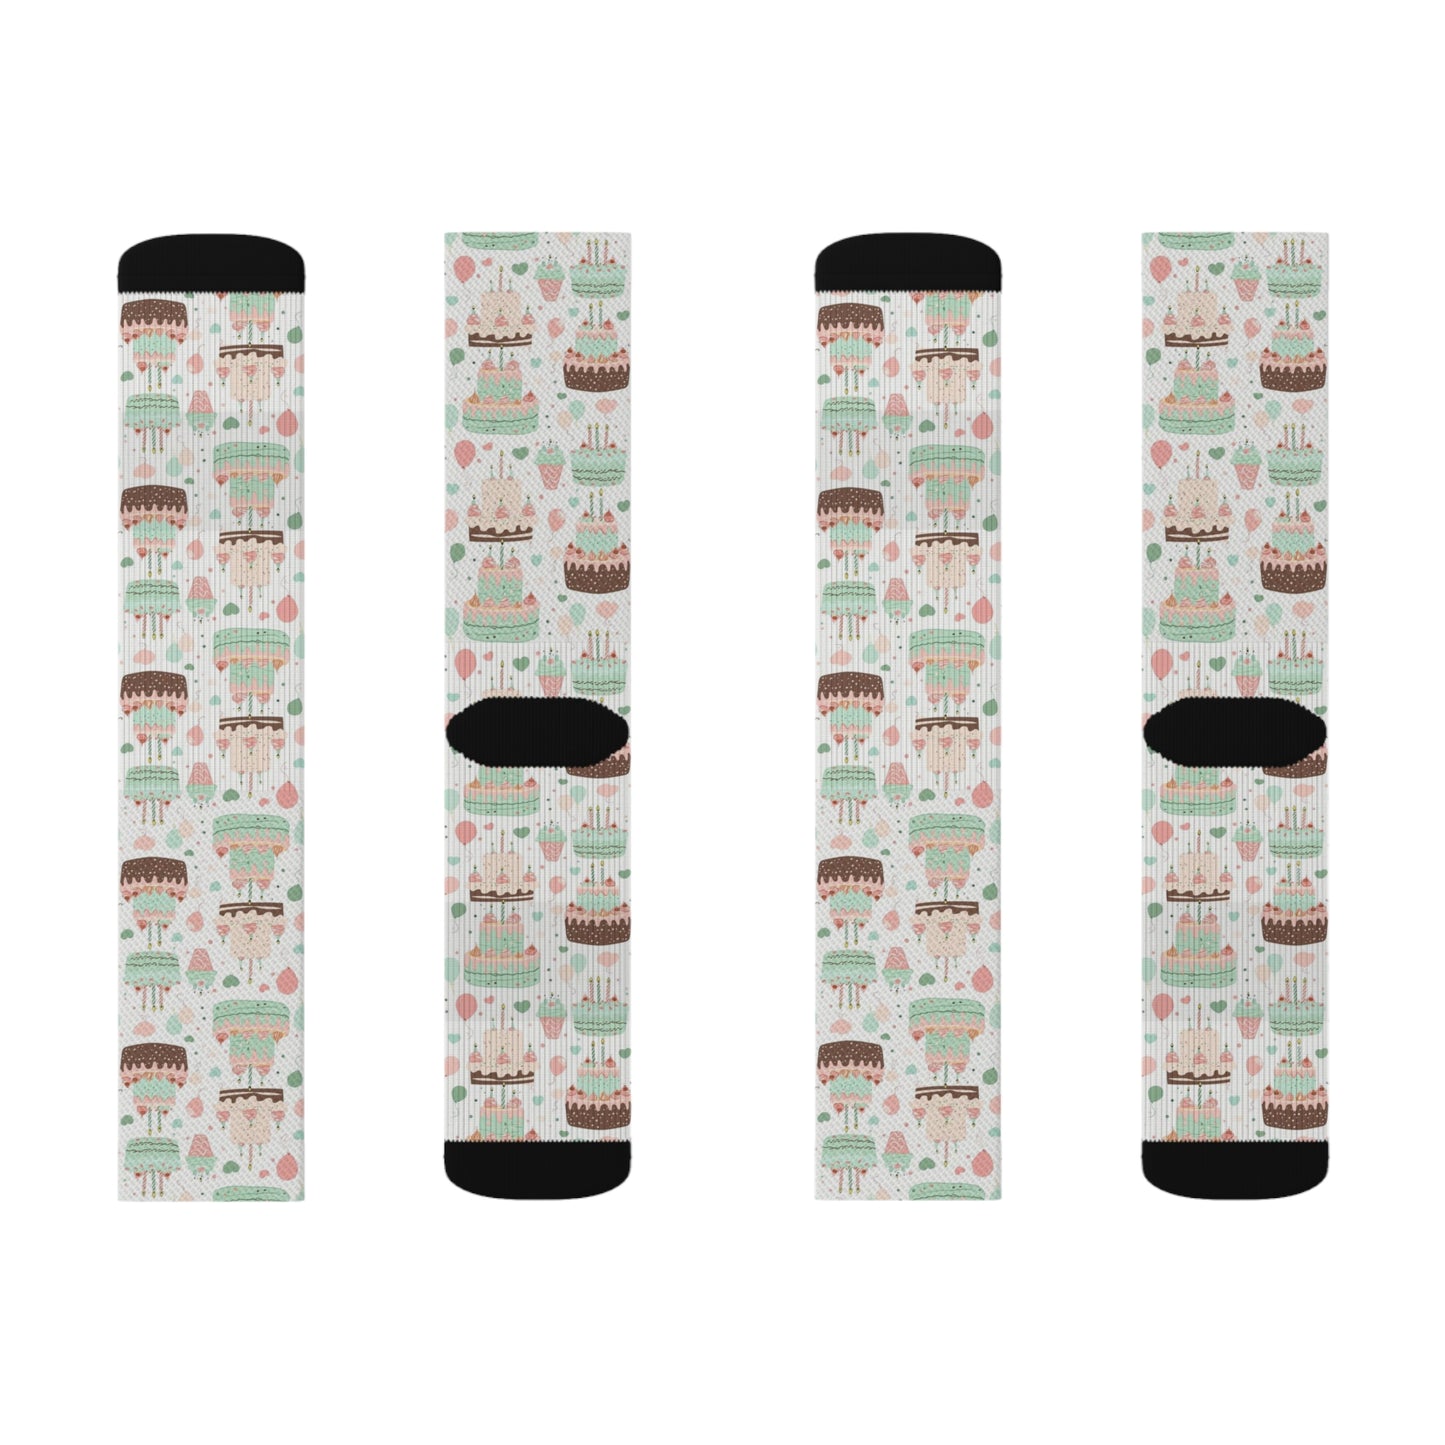 Birthday Socks, Happy Cake Party Crew Sublimation Women Men Designer Fun Novelty Cool Funky Crazy Casual Cute Unique Dress